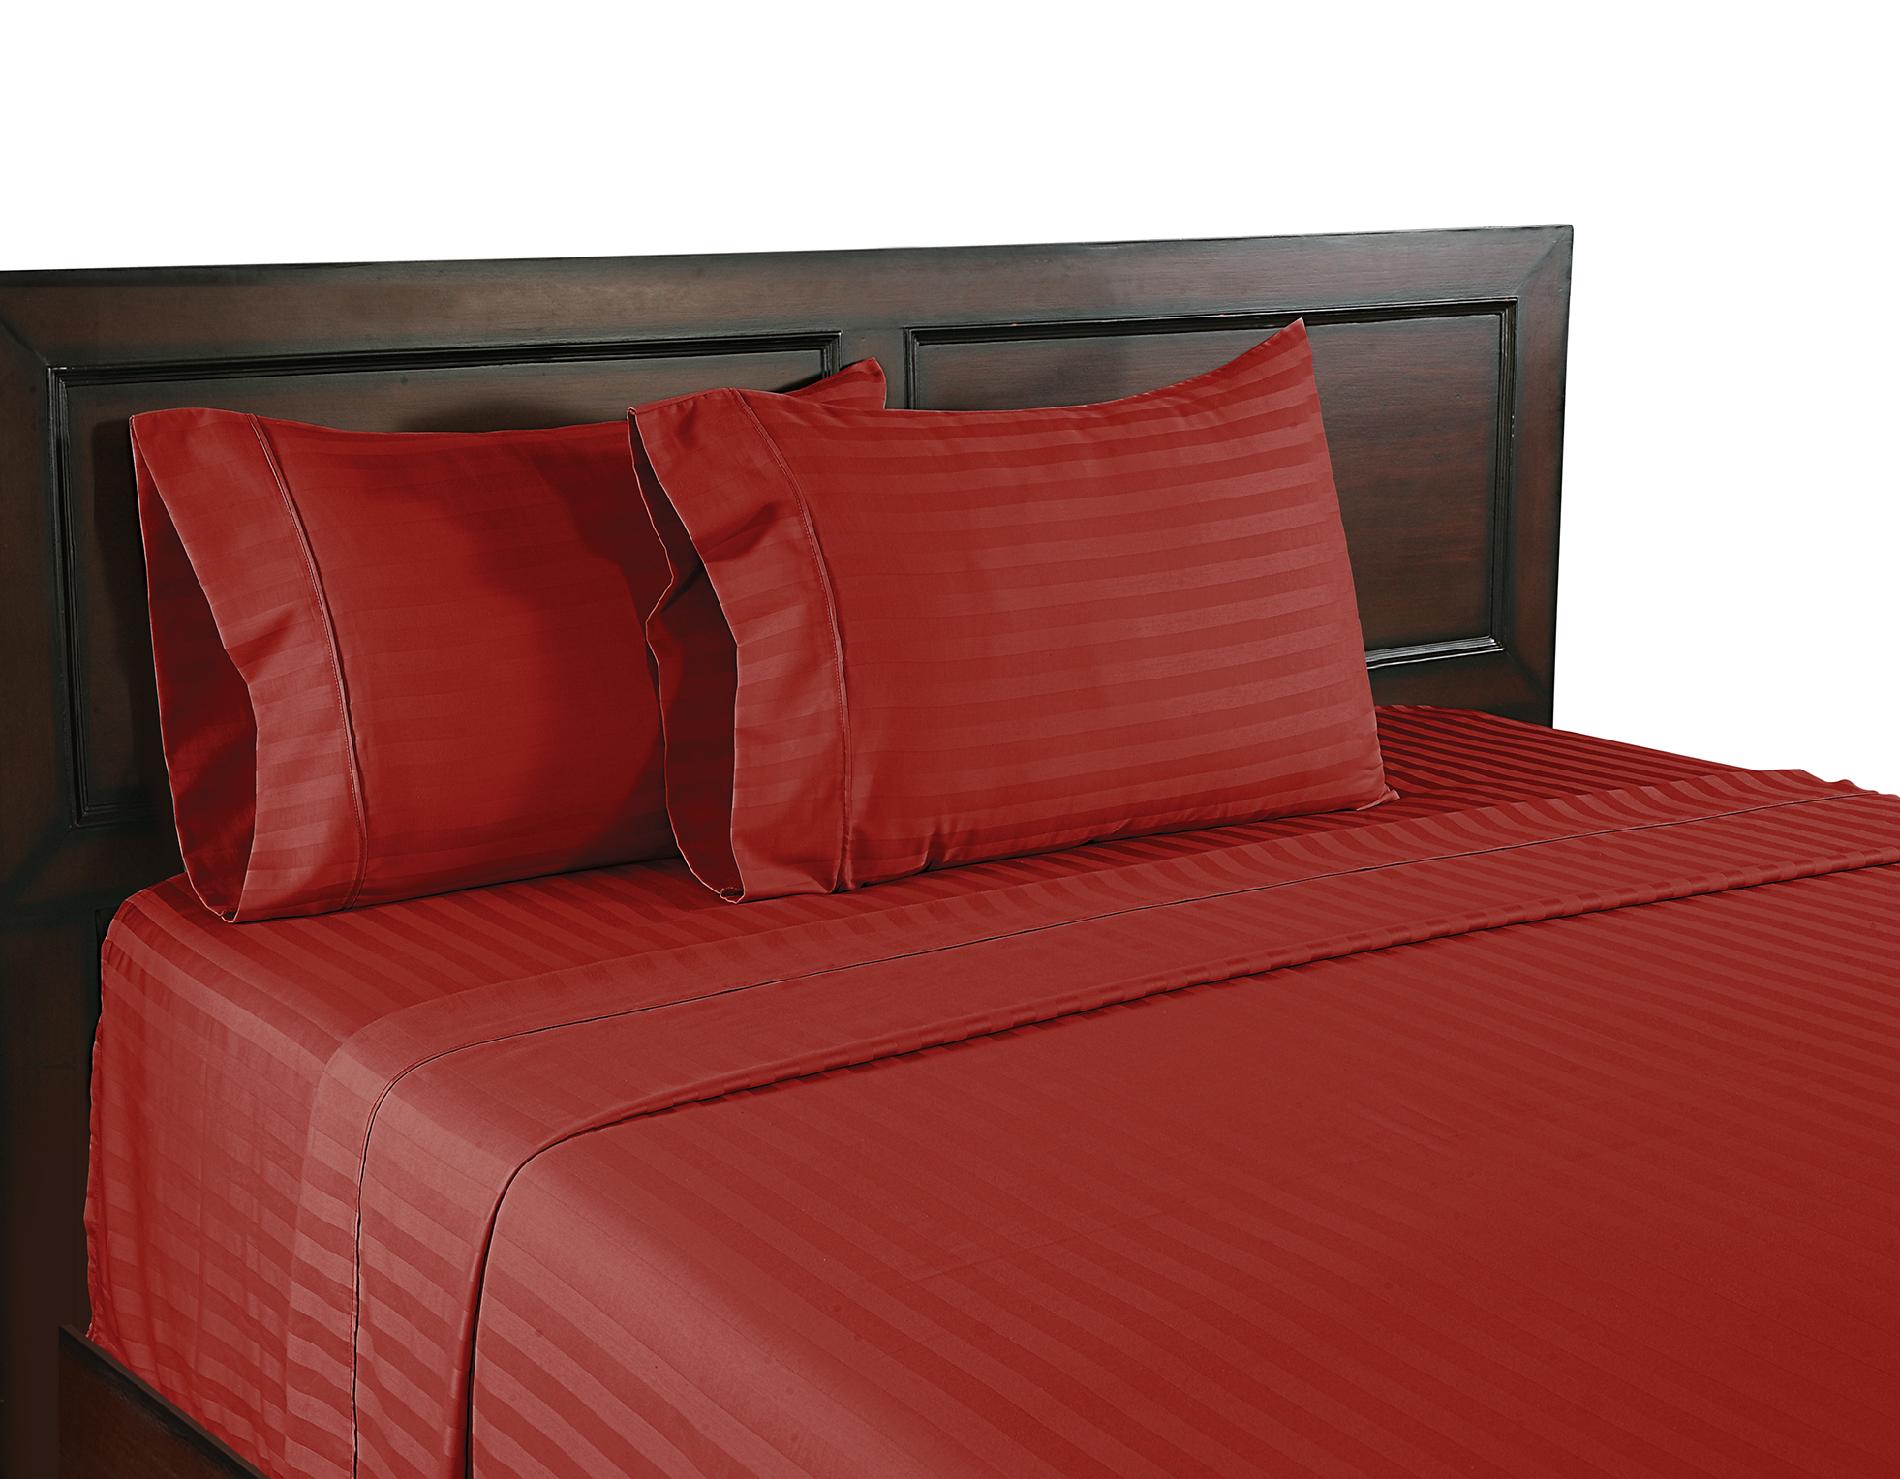 Color Sense Red, 310 Thread Count Wrinkle Free Cotton Sheet Set